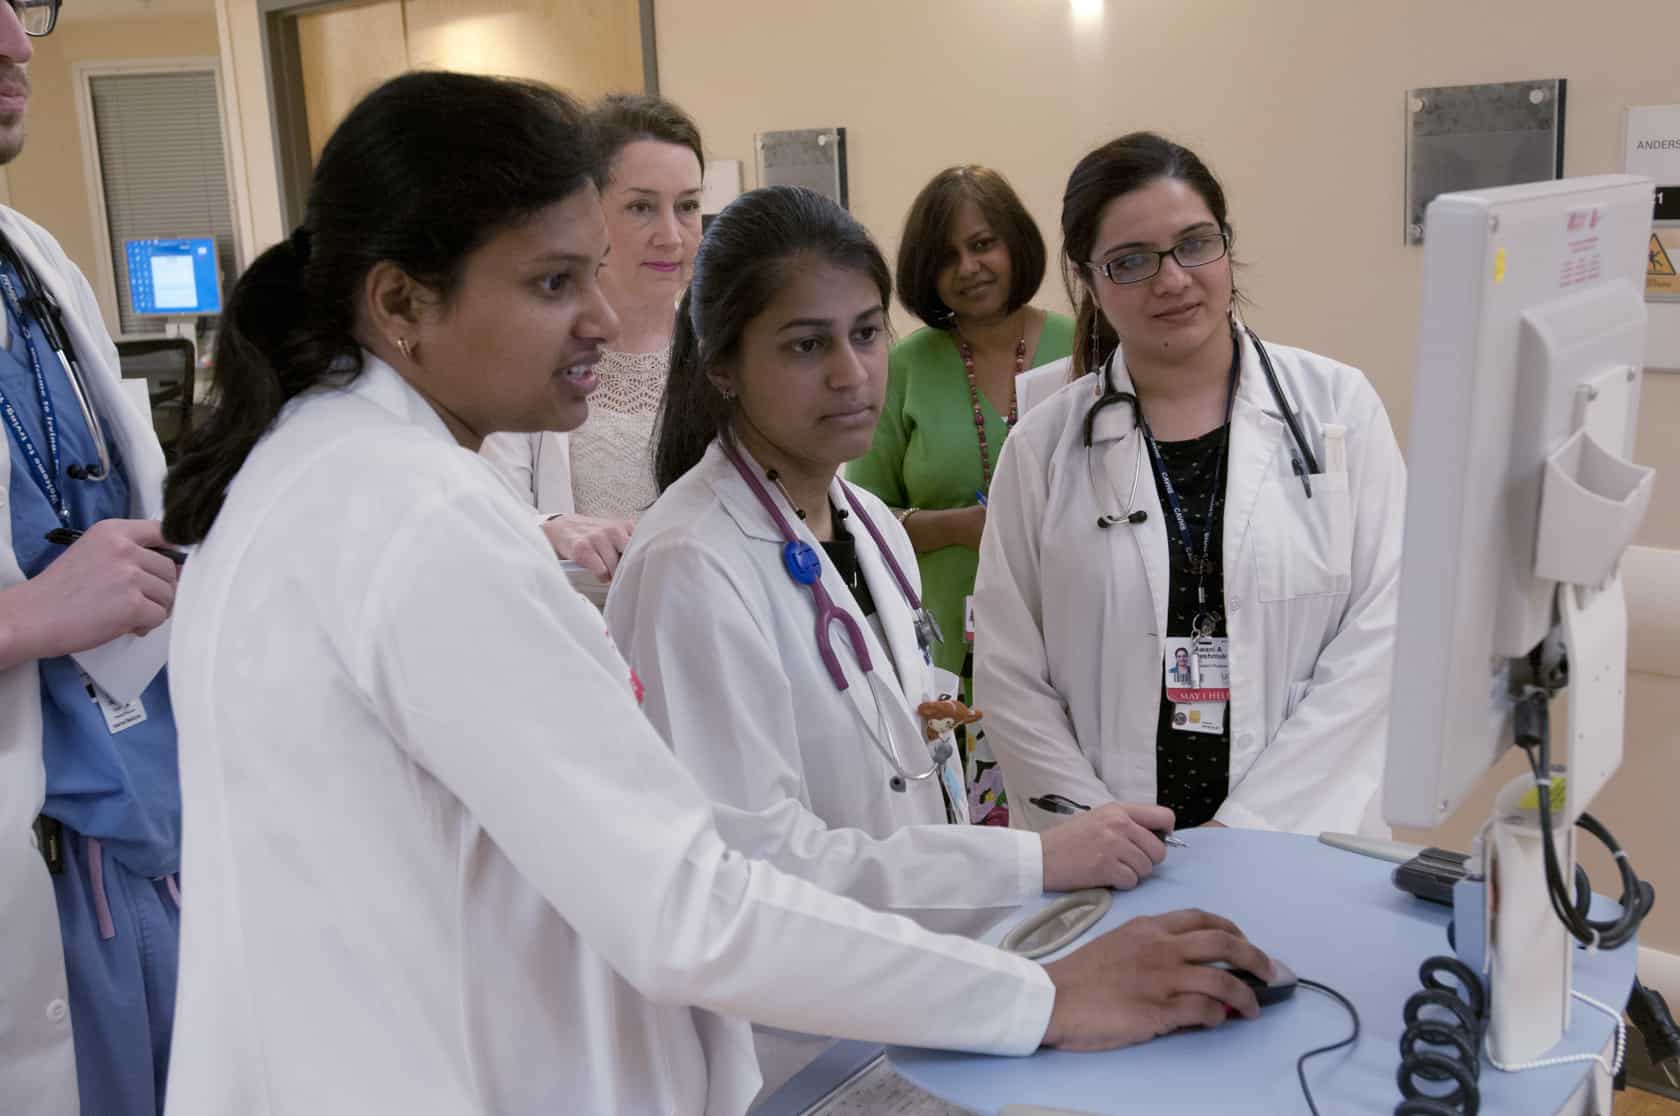 UAMS resident physicians will begin training at Baptist Health in 2019 in newly created internal medicine and family medicine programs.